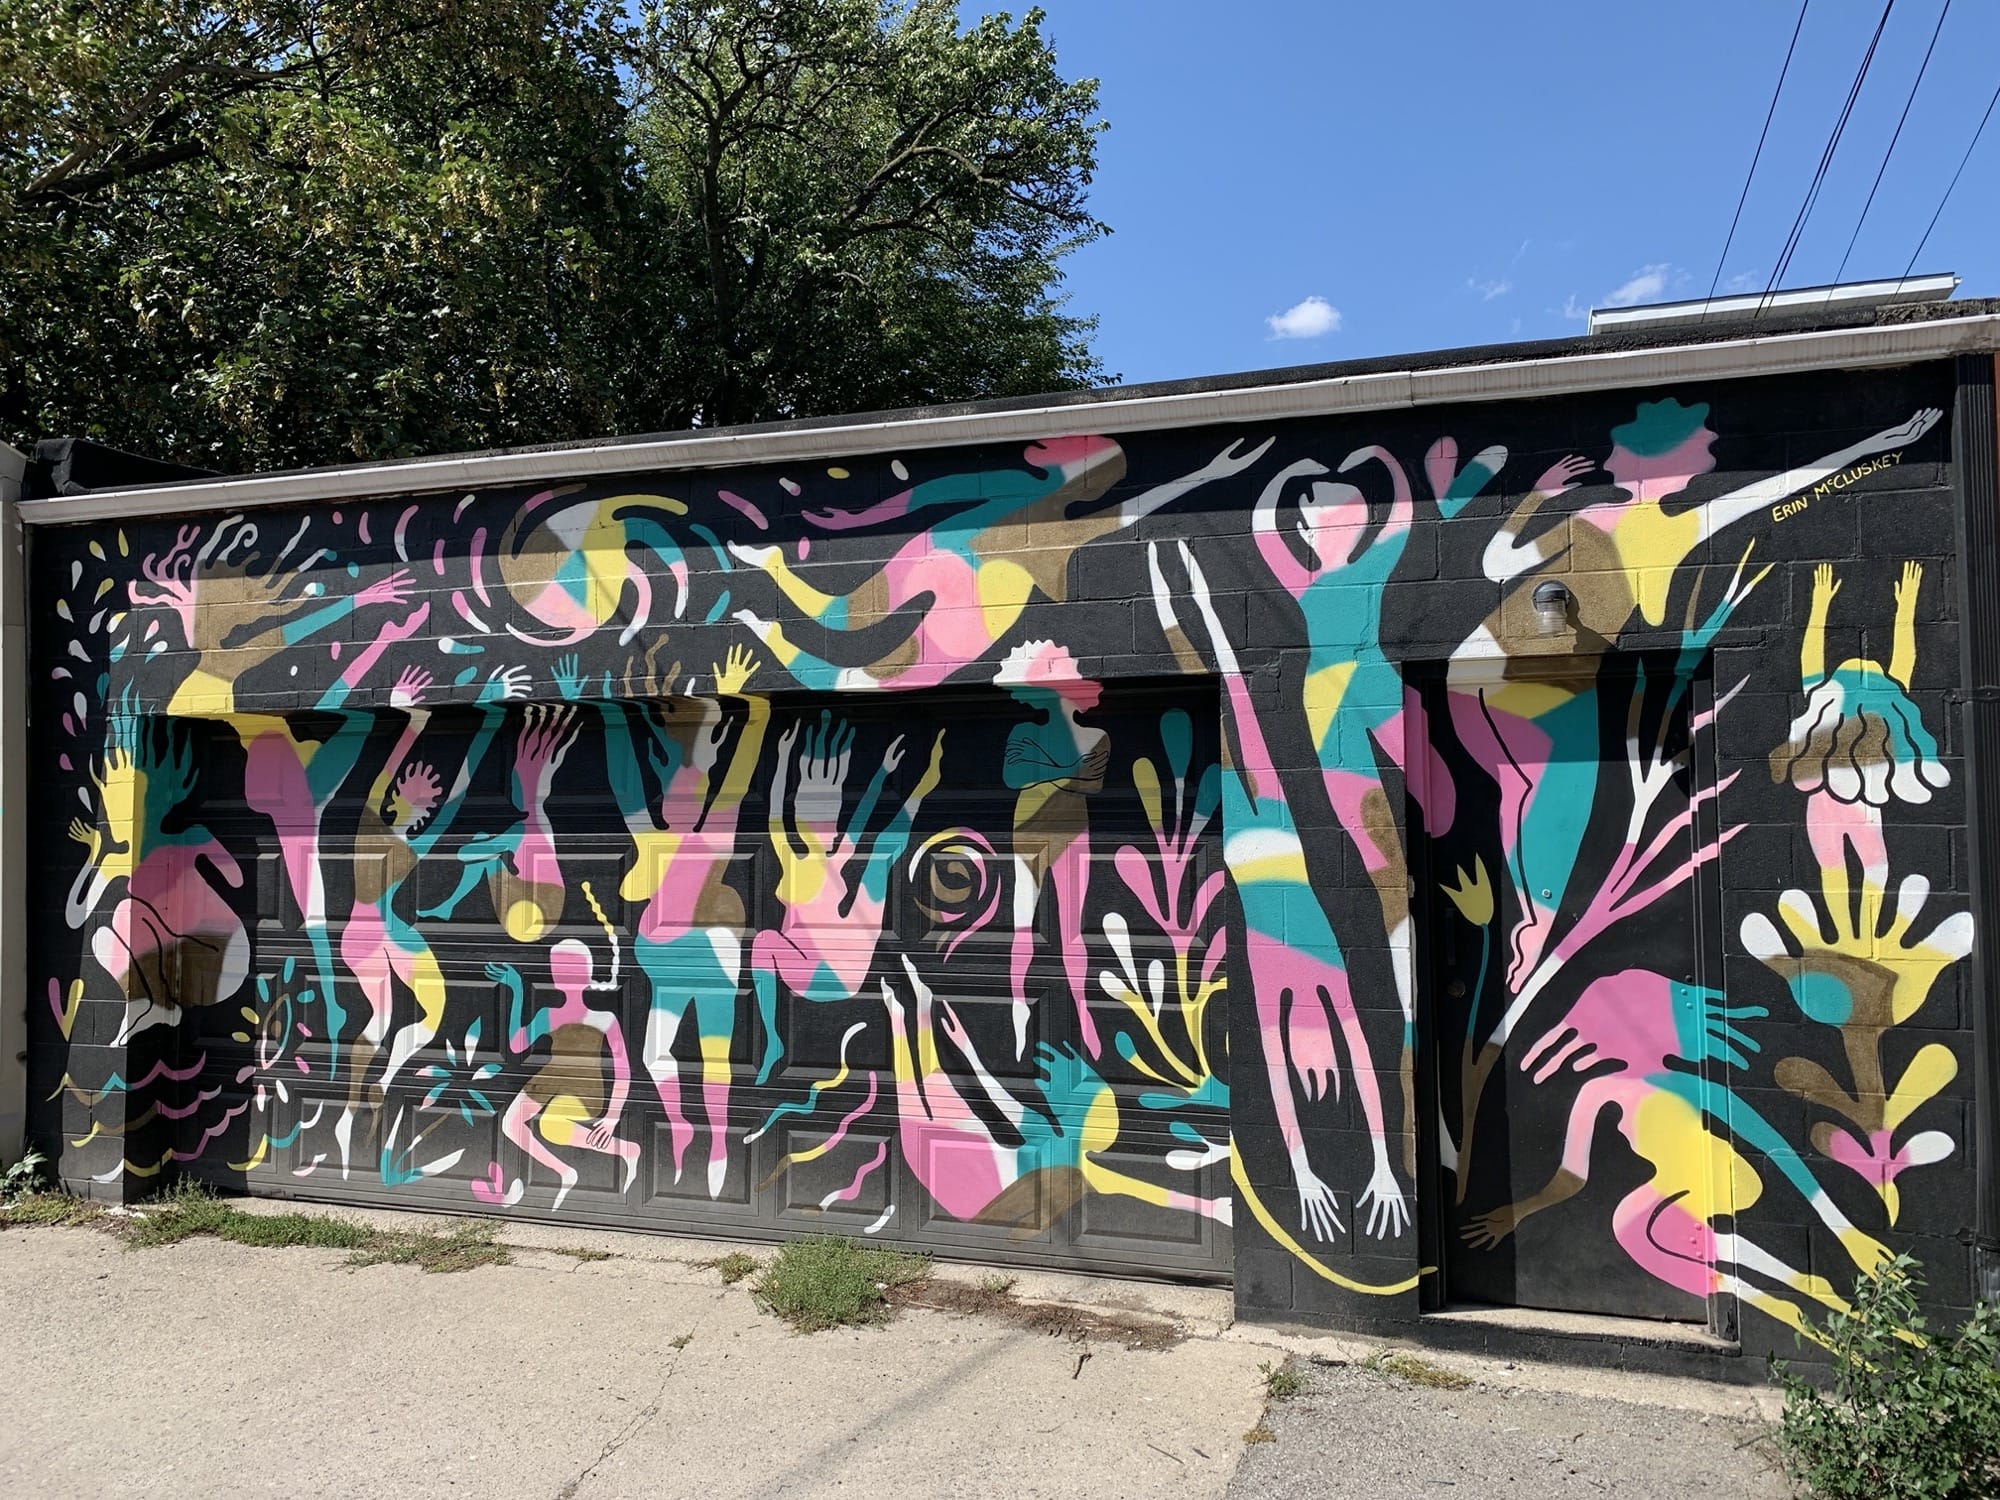 Graffiti 2352  captured by Rabot in Toronto Canada